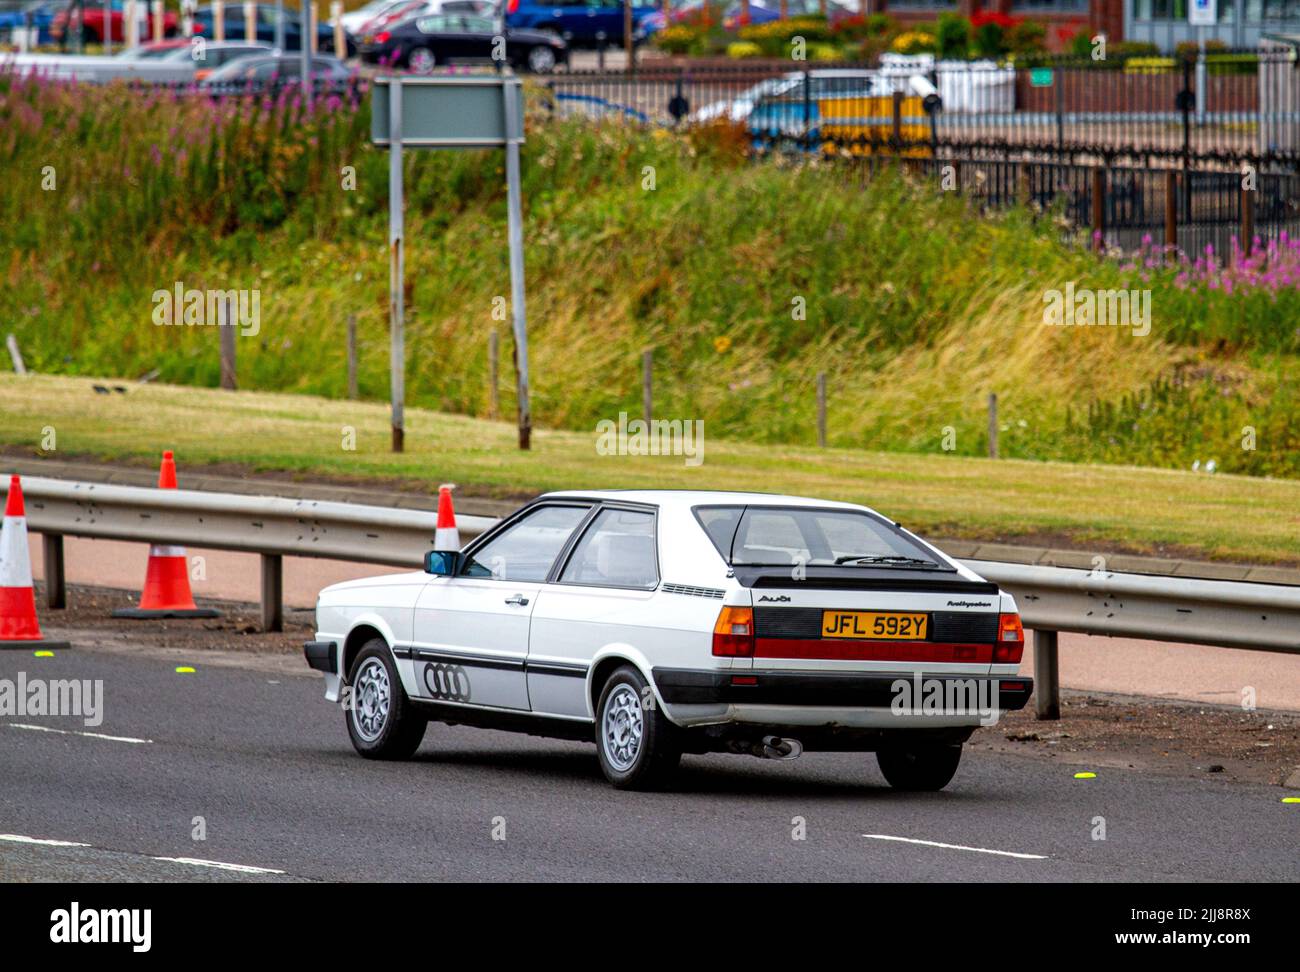 A 1982-83 Audi fuel Injection coupe car travelling along the Kingsway West dual carriageway in Dundee, Scotland Stock Photo